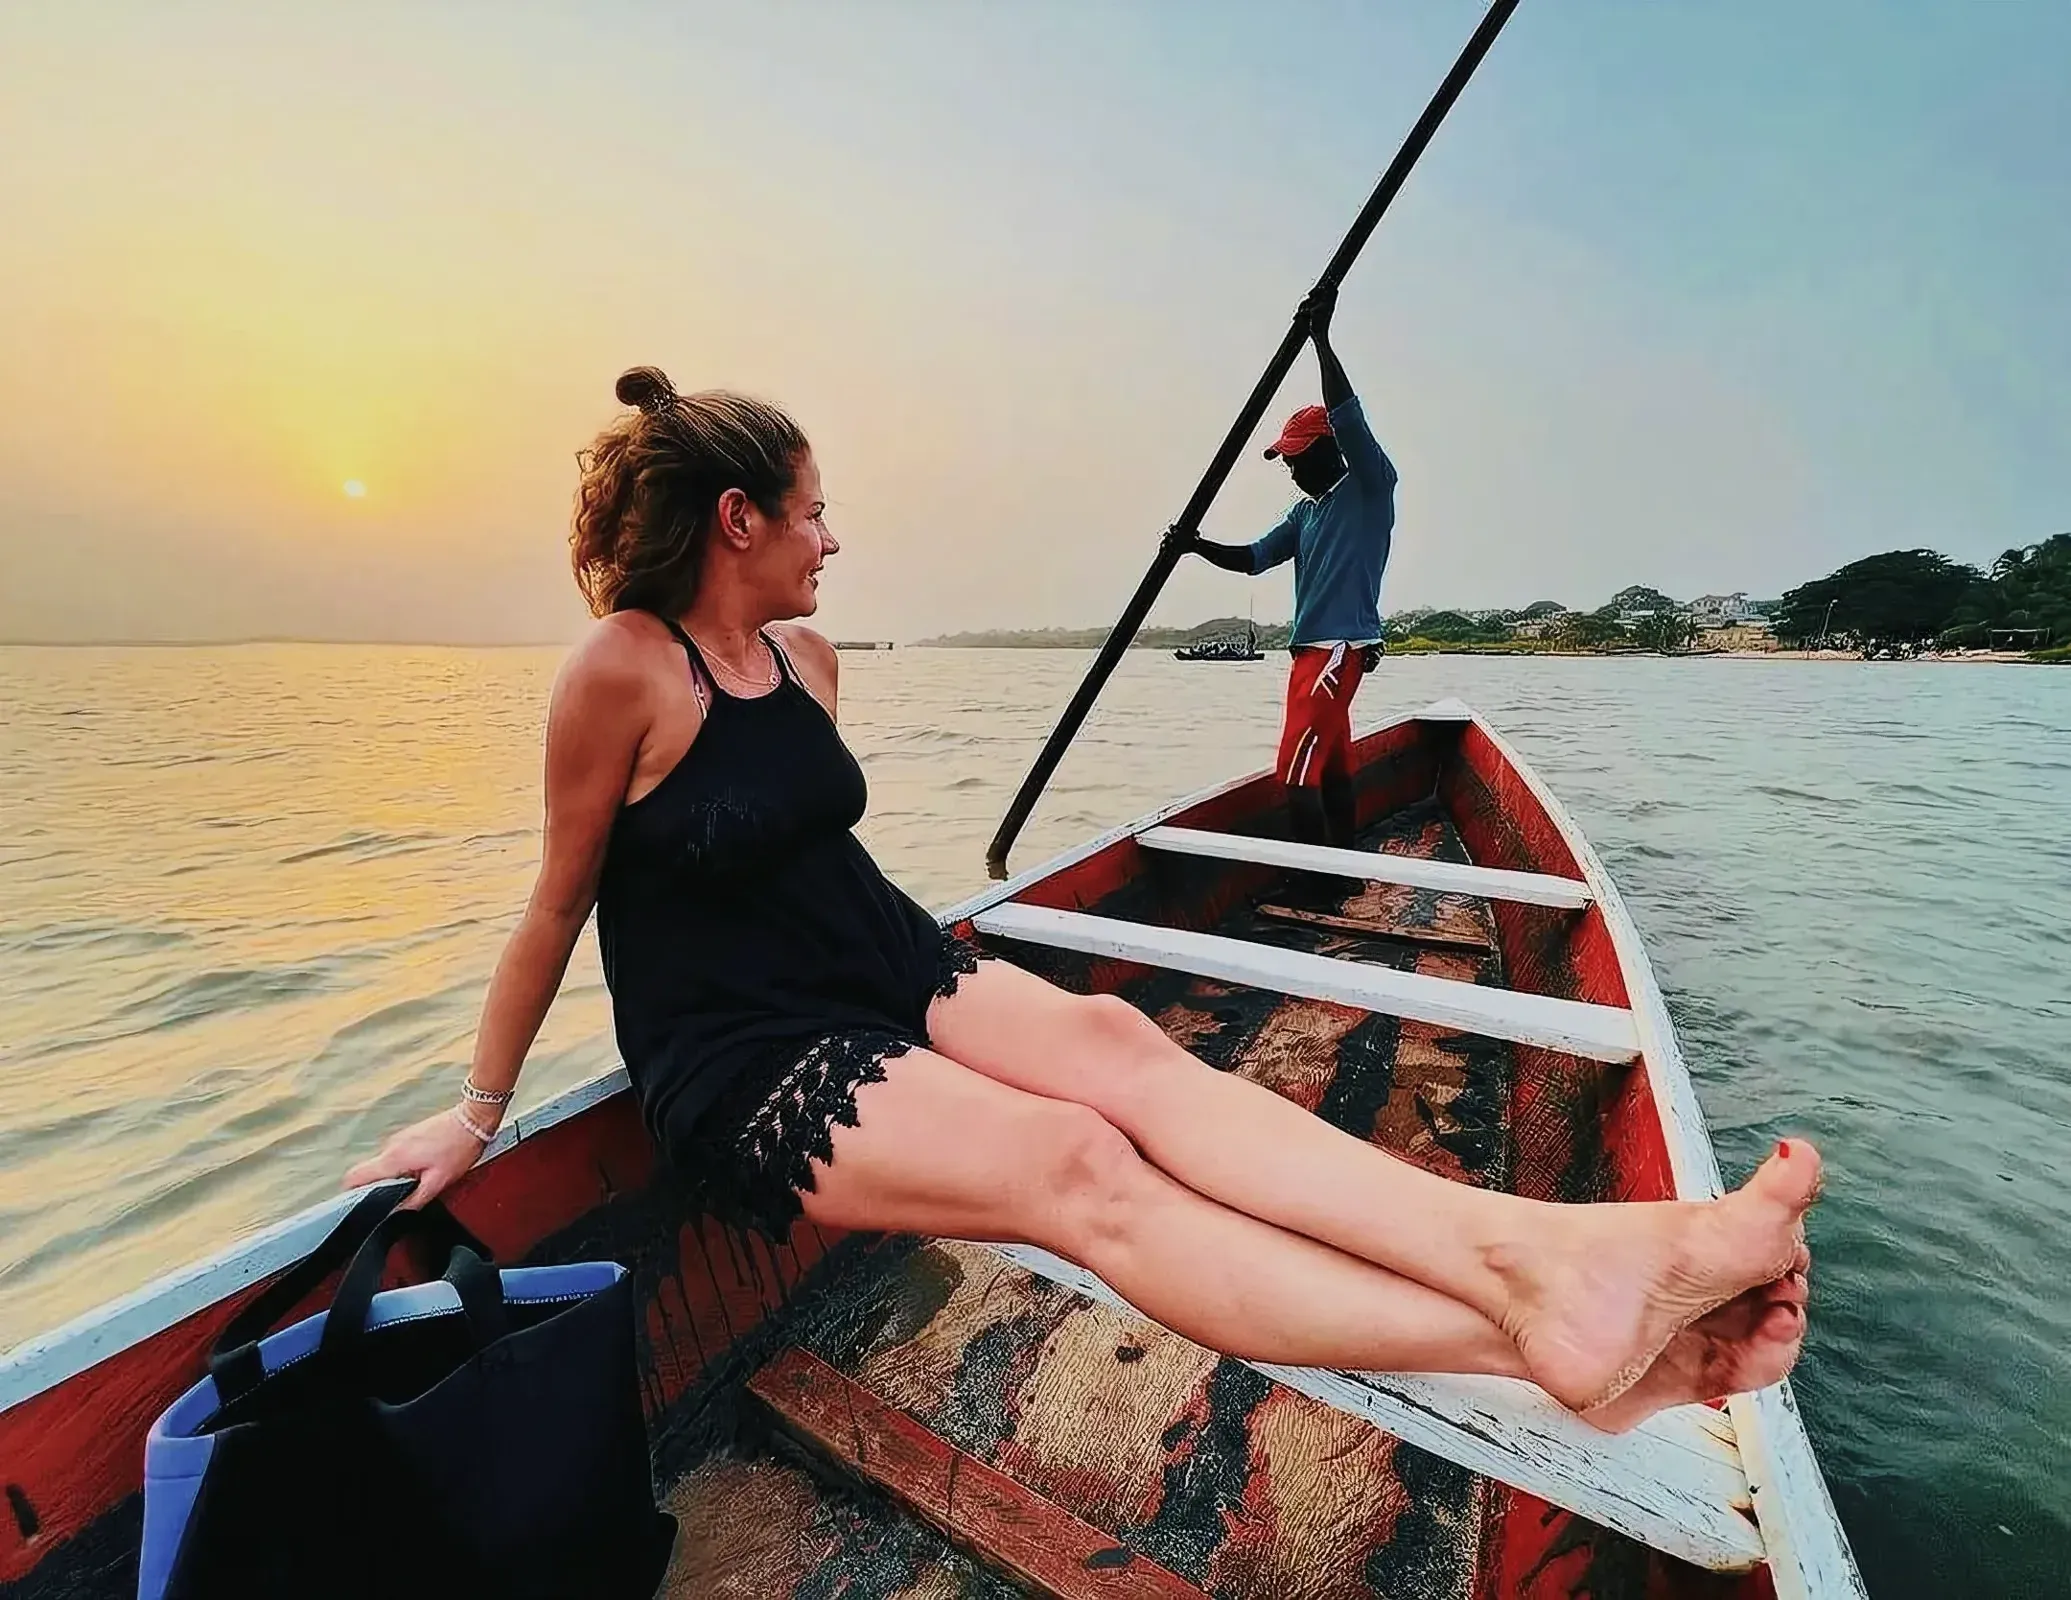 Woman enjoying leisure time on a boat in Togo